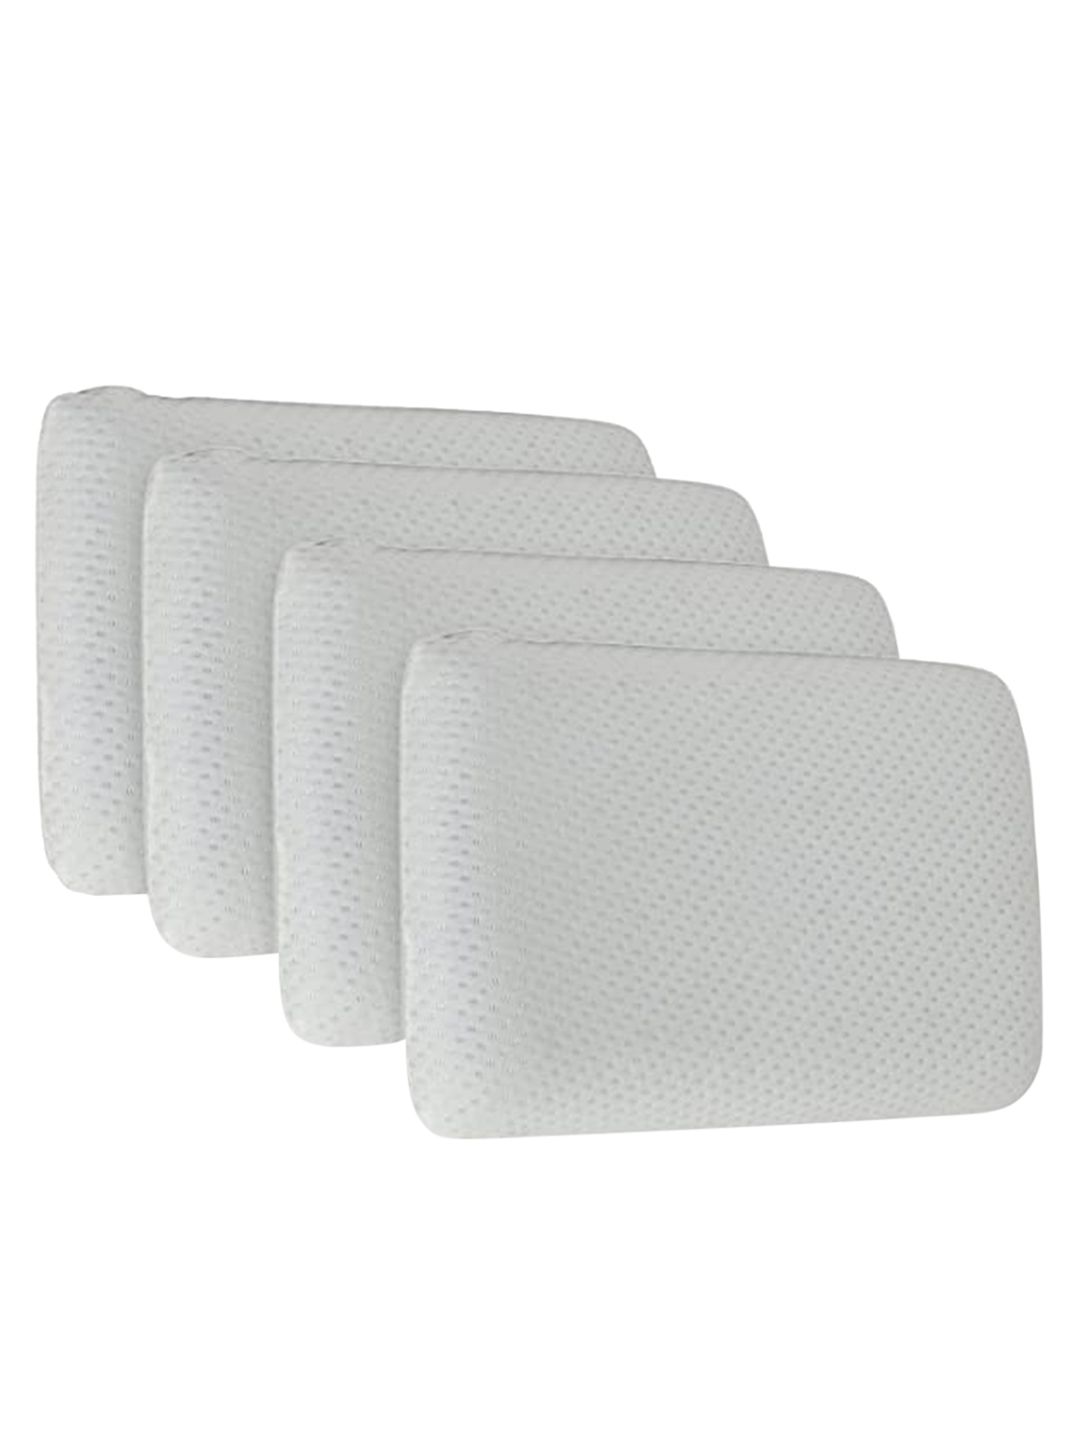 Sleepsia Set of 4 White Solid Memory Foam Soft Bed Pillow Price in India